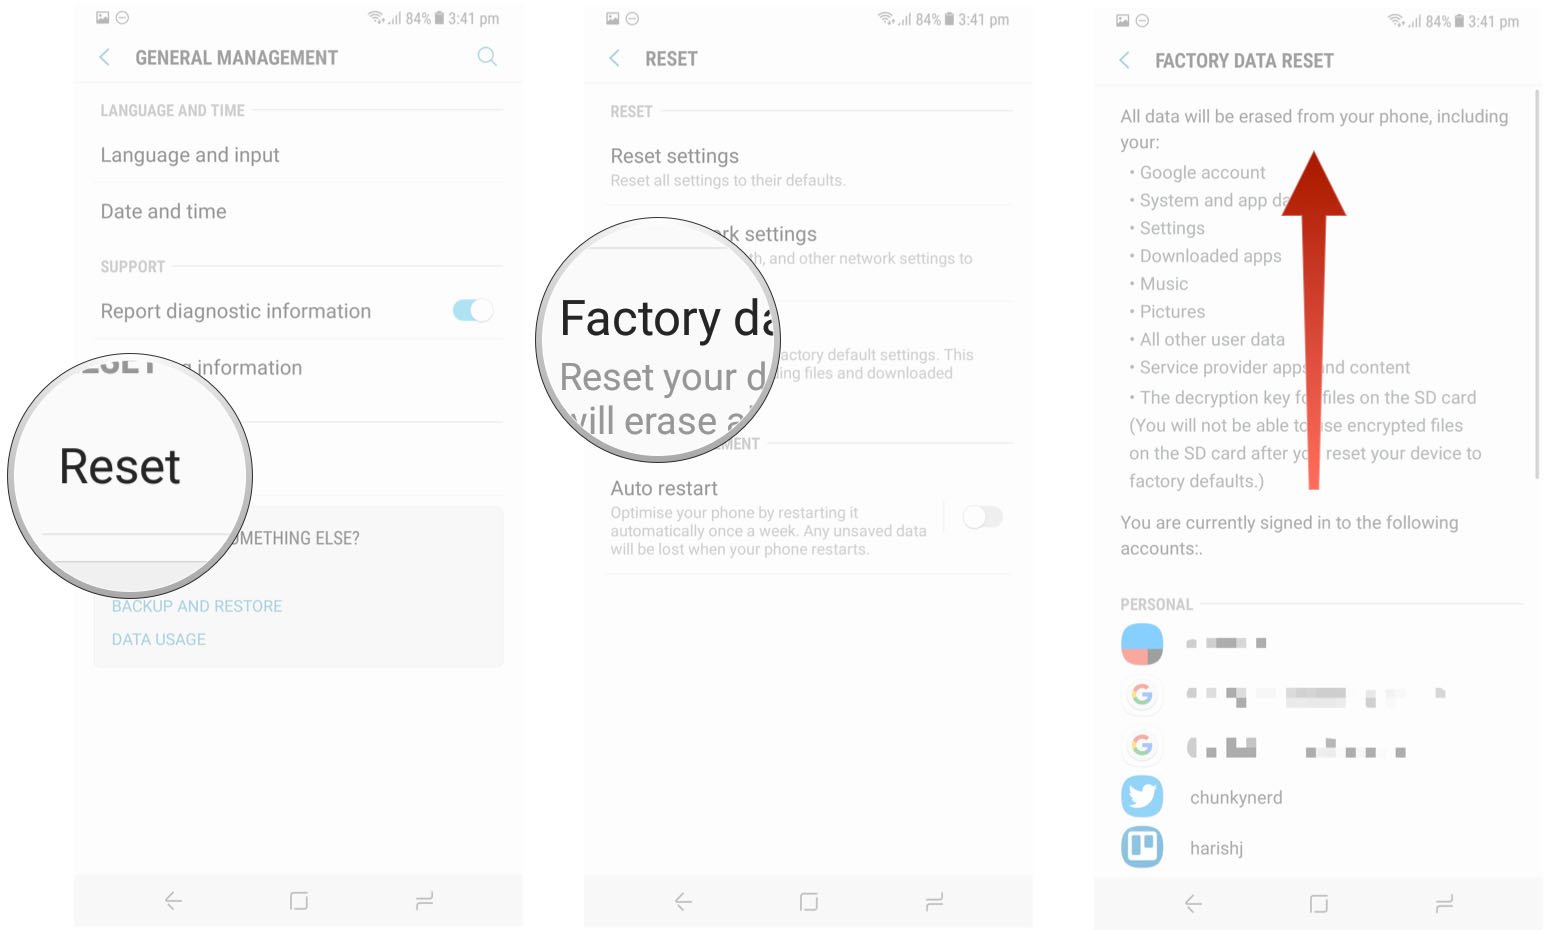 How to factory reset a Samsung phone